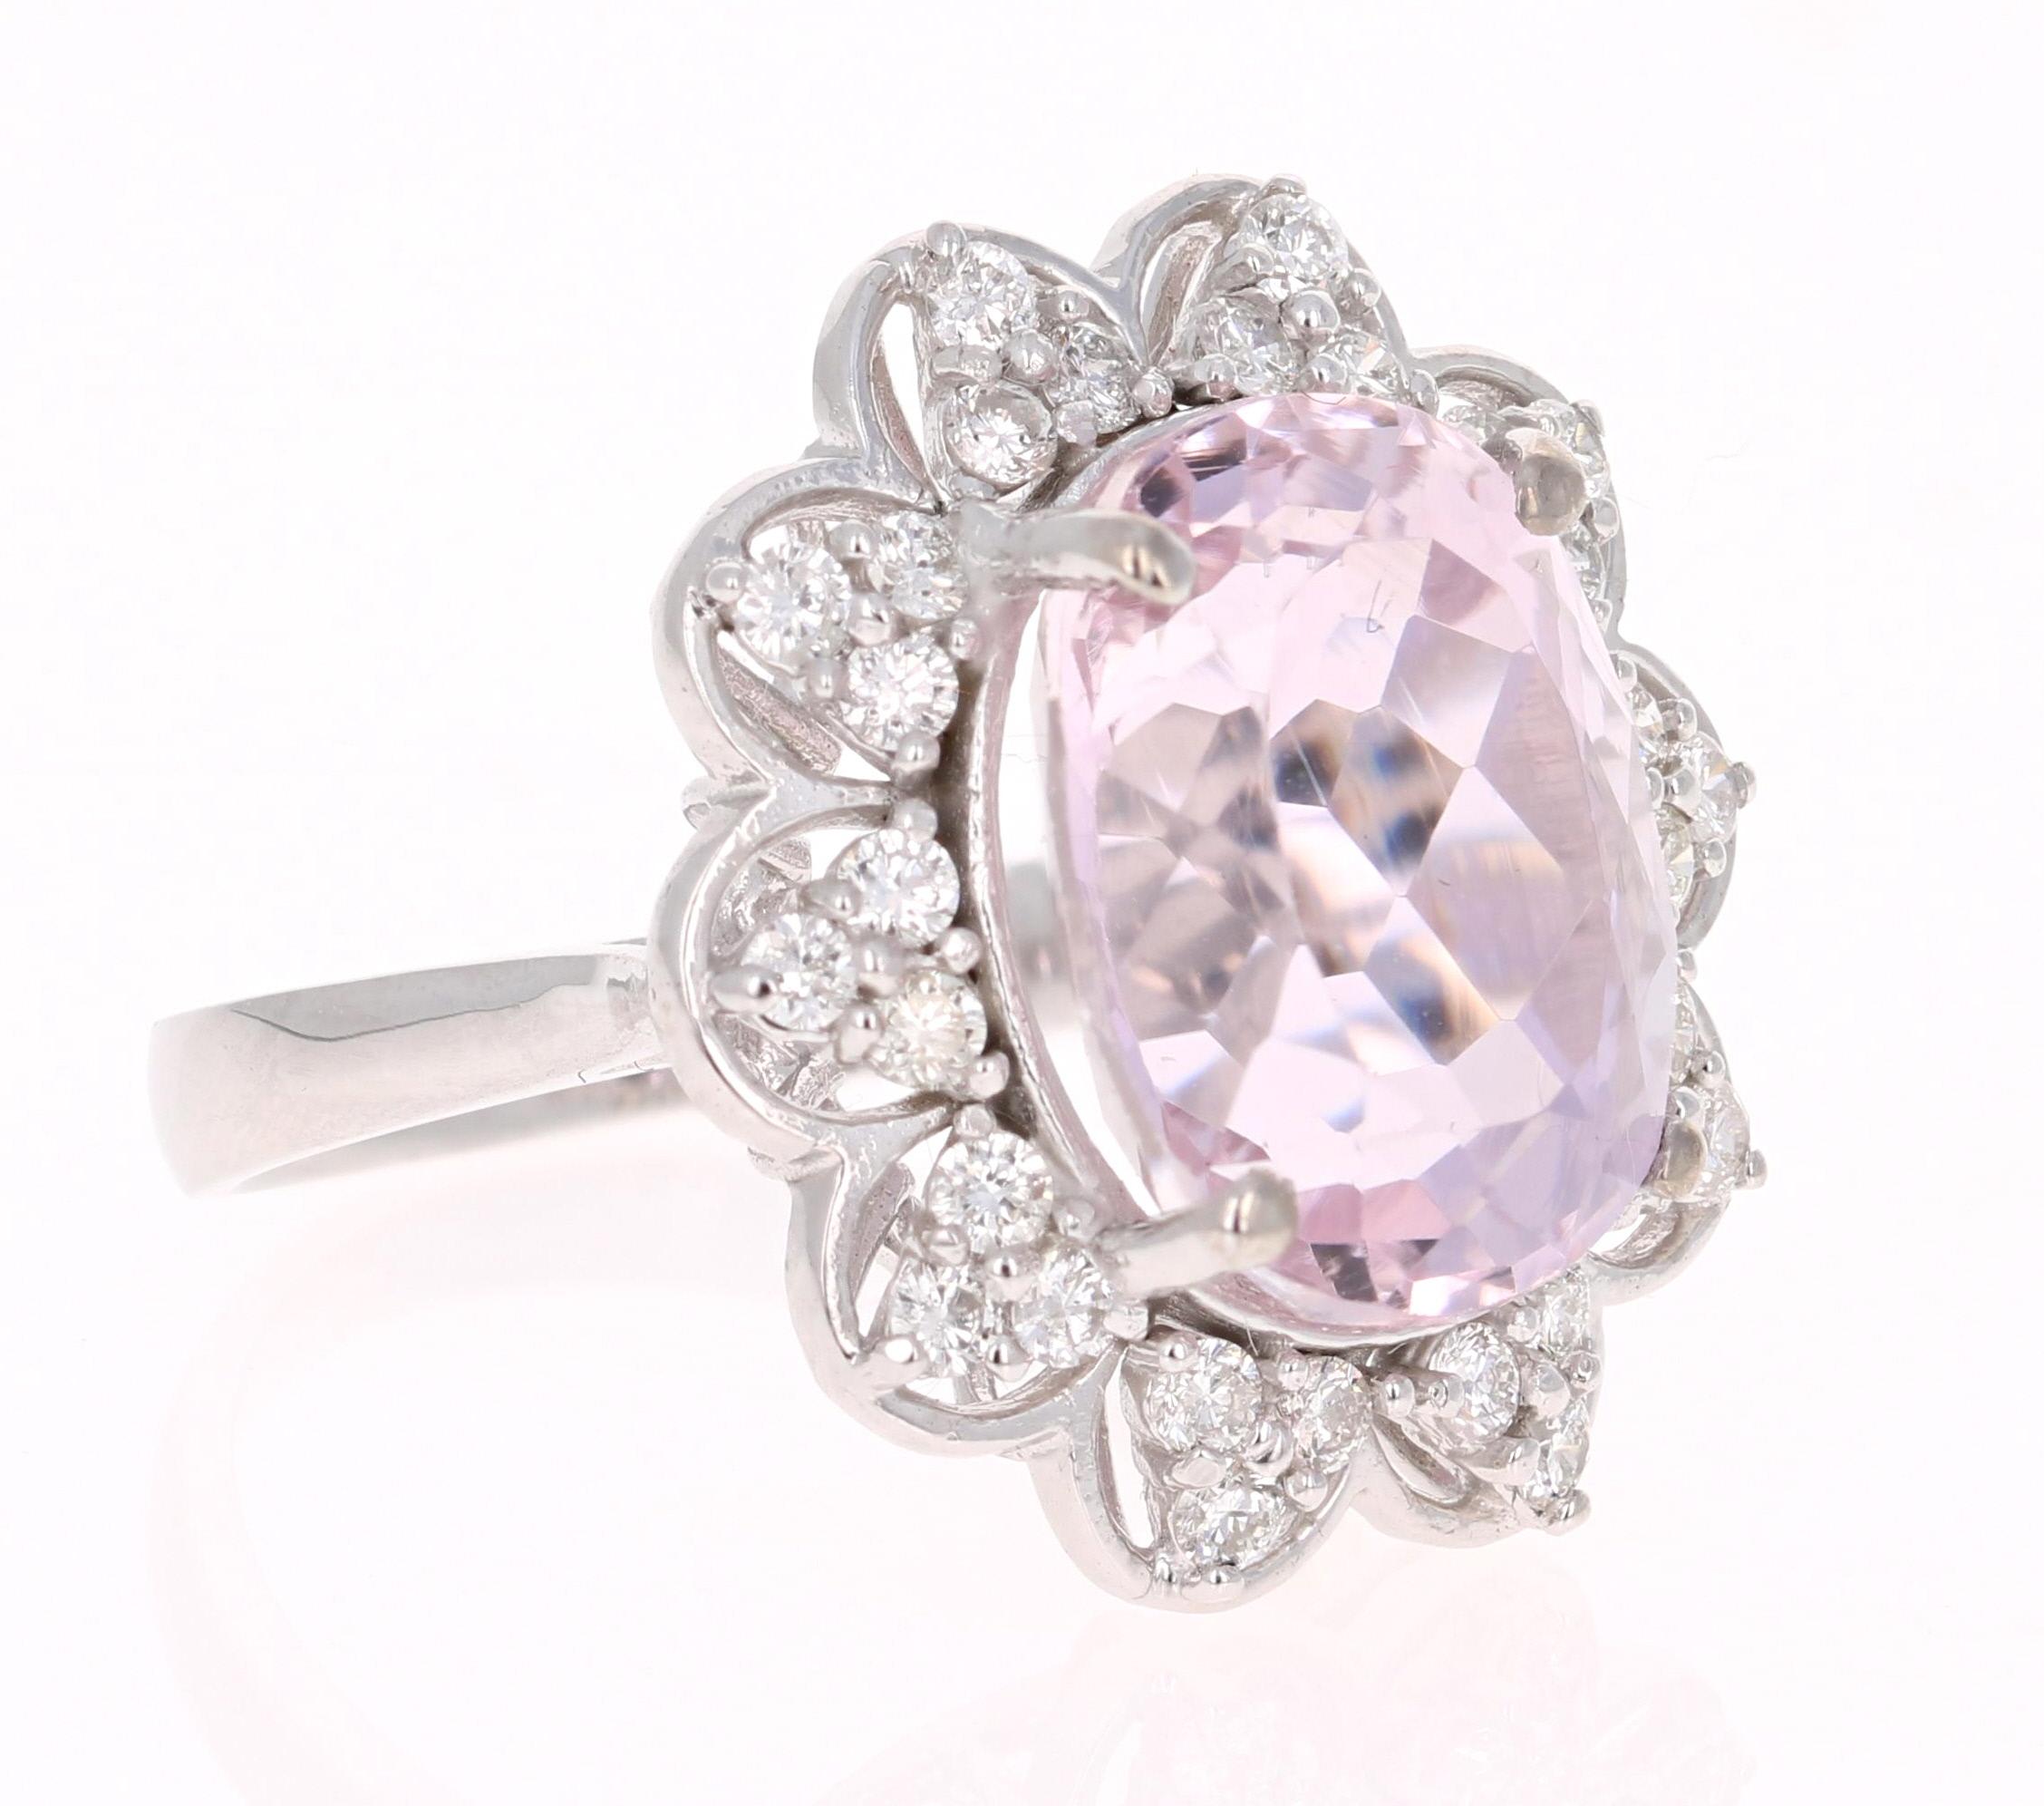 A beautiful Kunzite Ring resembling a fresh dainty flower. This gorgeous Kunzite Diamond Ring has a 9.85 Carat Oval Cut Kunzite as its center and is surrounded by 30 Round Cut Diamonds that weigh 0.74 carats. The total carat weight of the ring is